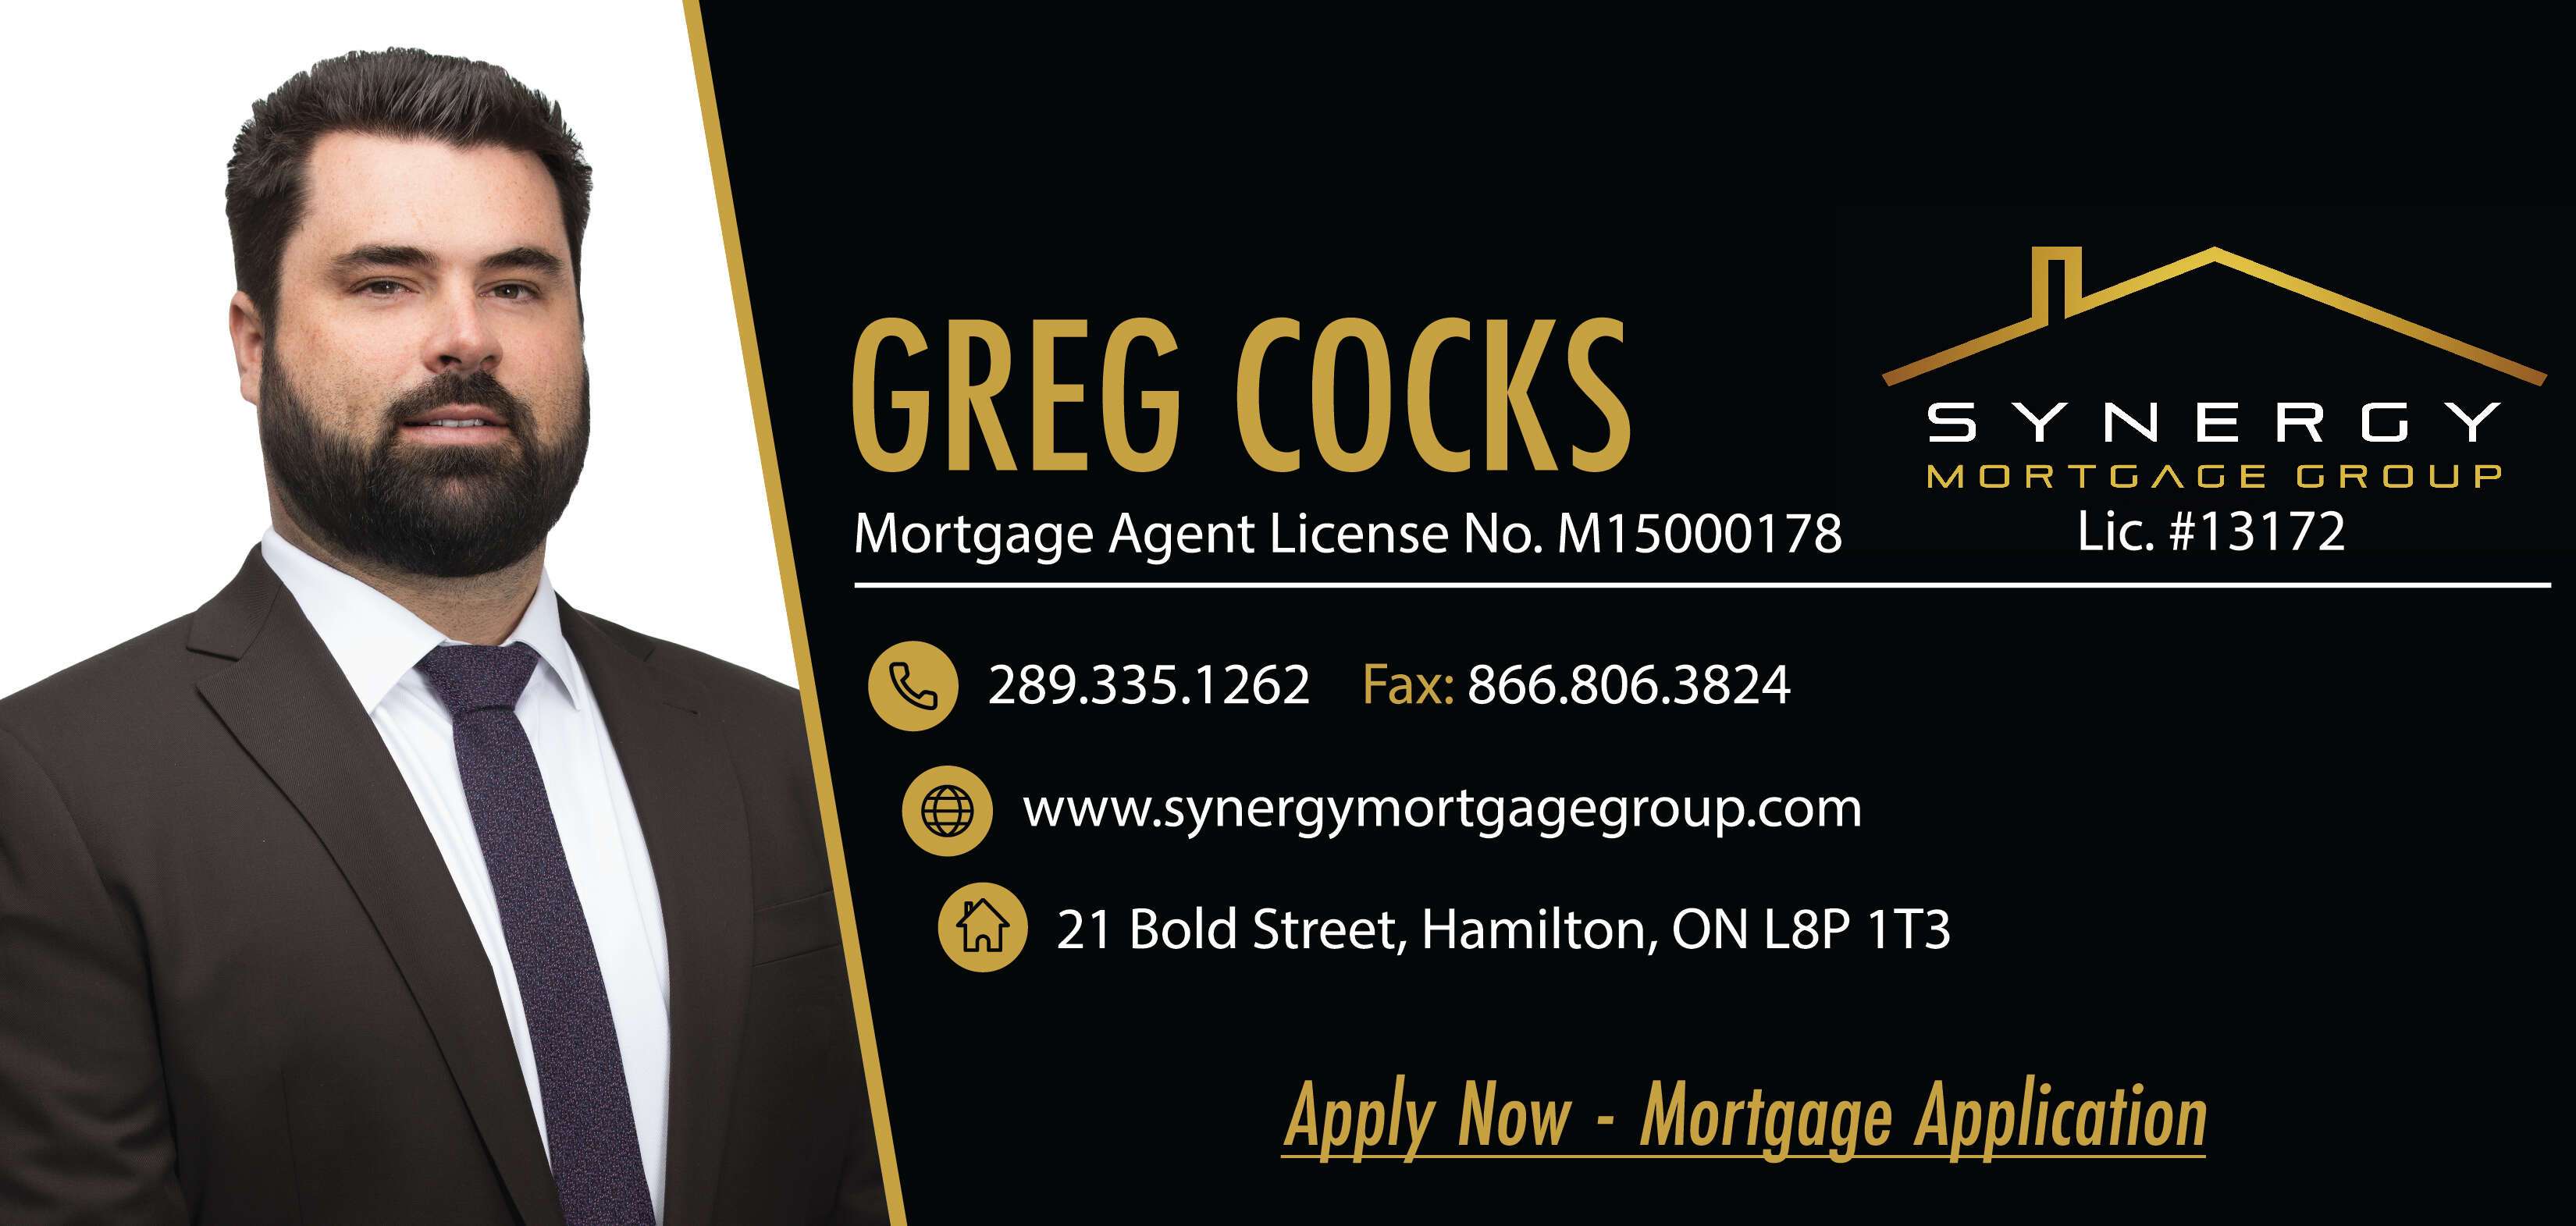 Synergy Mortgage Group